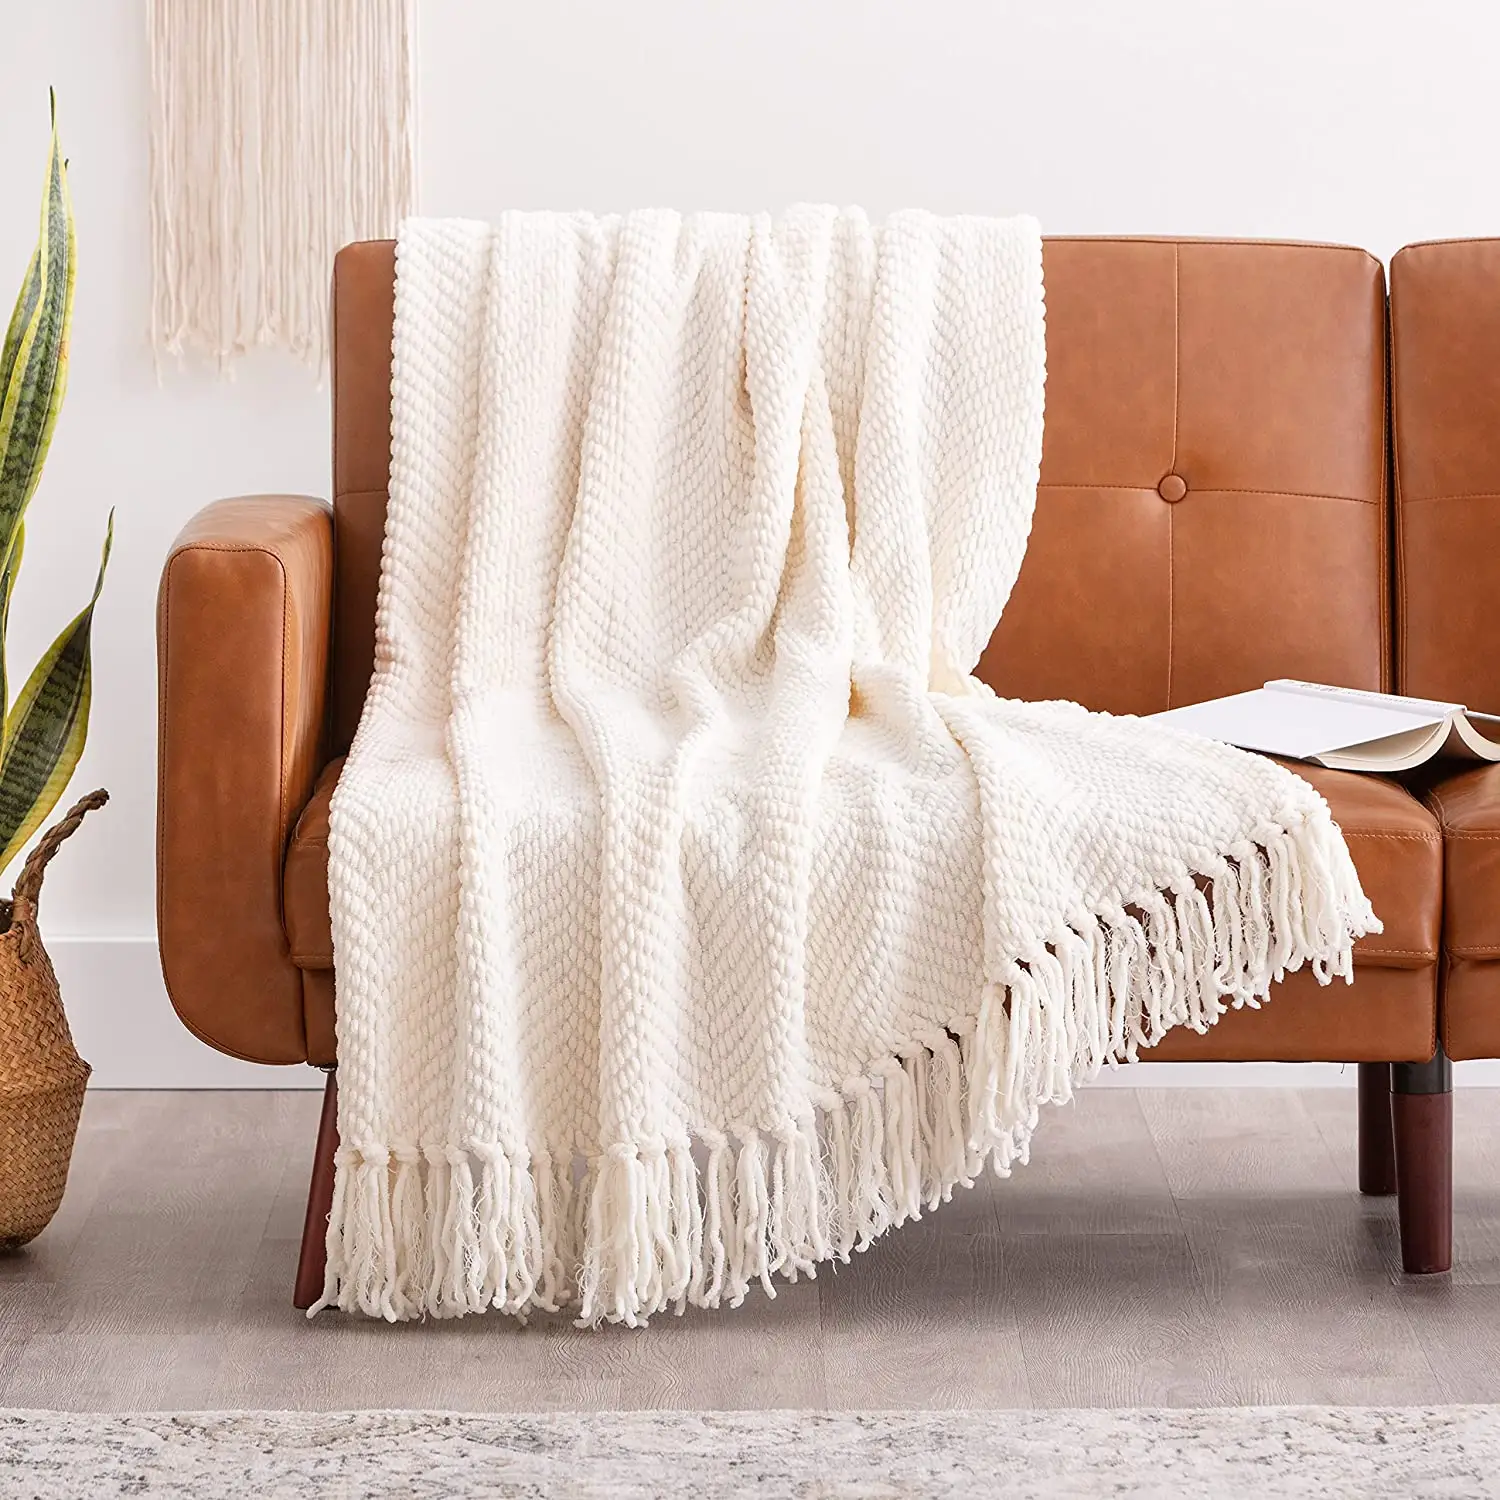 Amazon Top Seller Textured Knitted Super Soft Throw Blanket with Tassels Boho Fluffy Cozy Blanket for Couch Bed Sofa